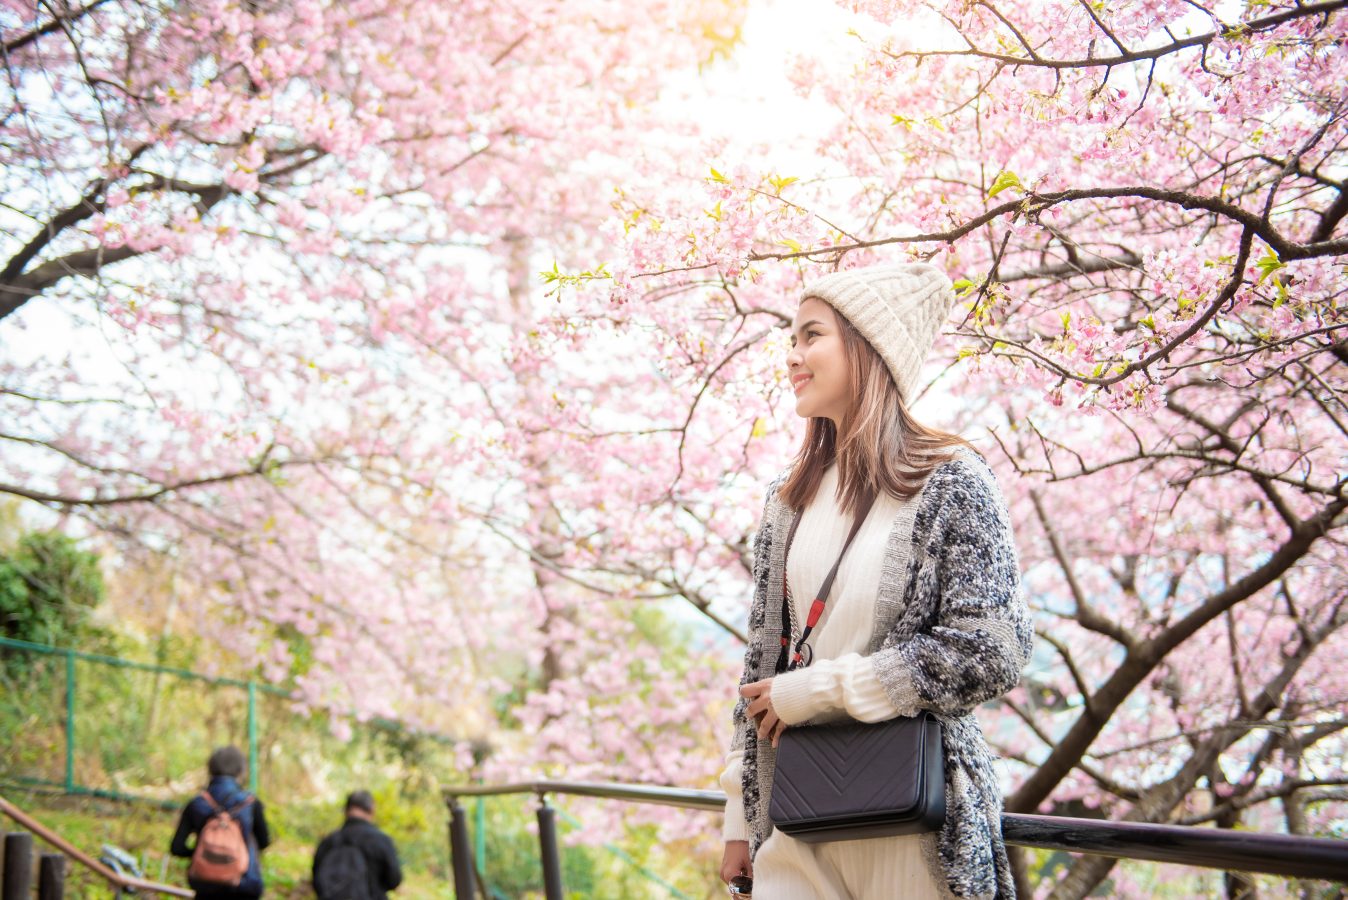 Woman enjoys the Japanese cherry blossoms in full pink bloom in Japan.